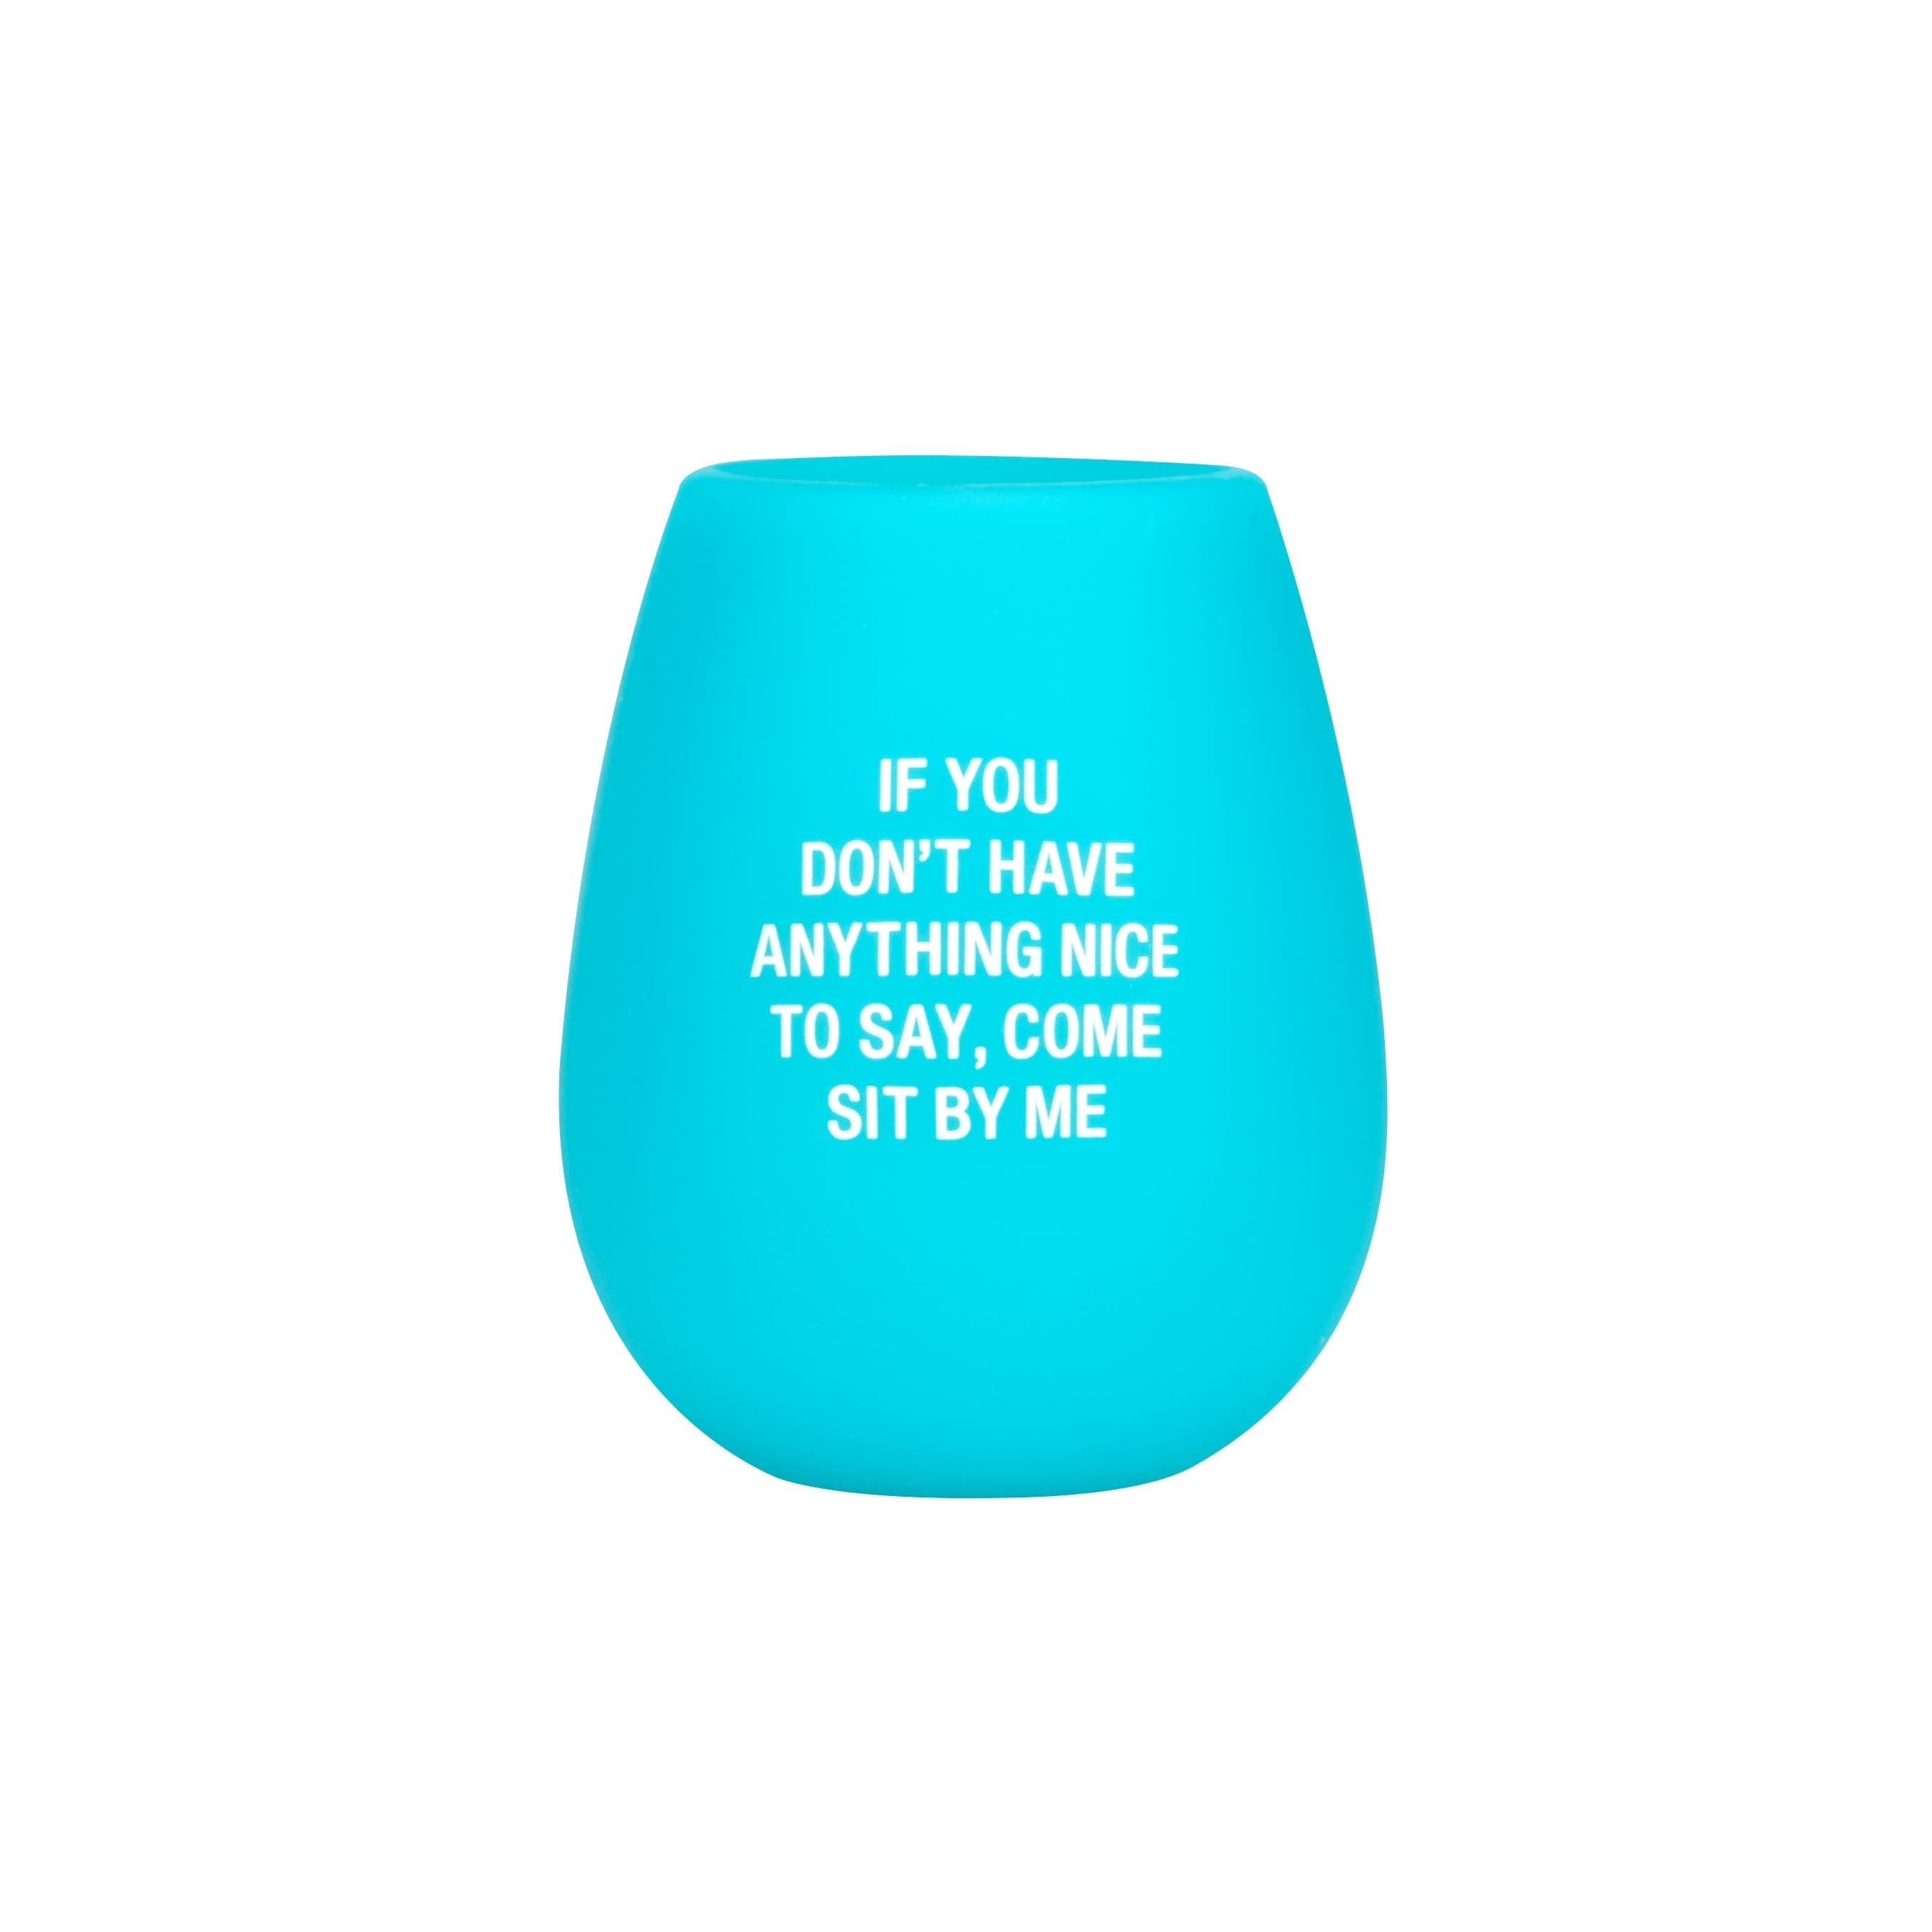 SALE! Sit By Me Silicone Wine Cup